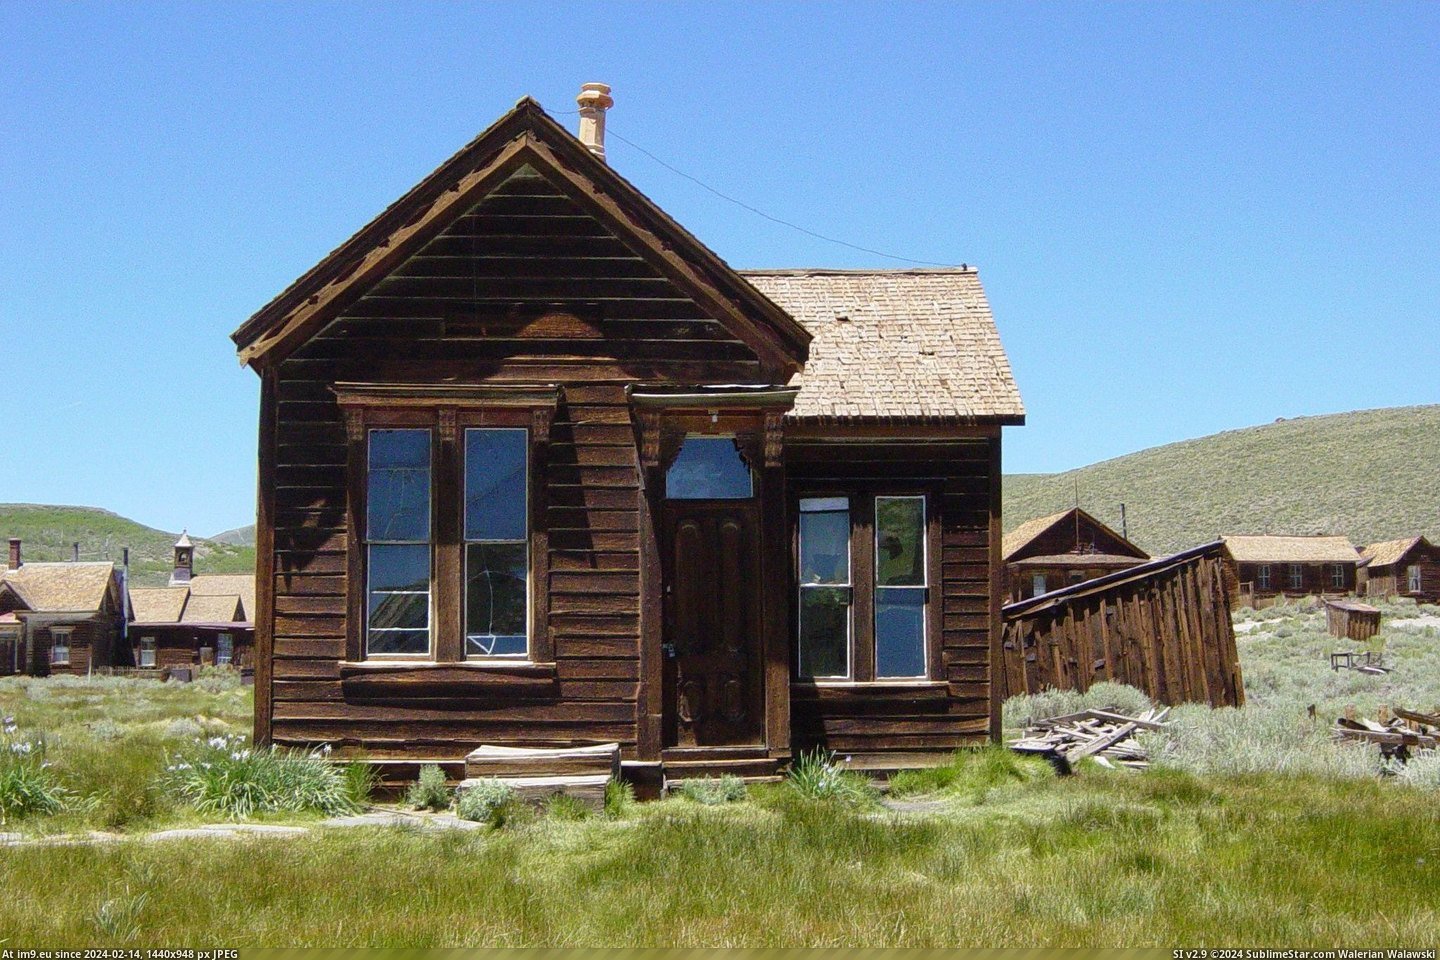 #California #Bodie #Johl #House Johl House In Bodie, California Pic. (Изображение из альбом Bodie - a ghost town in Eastern California))